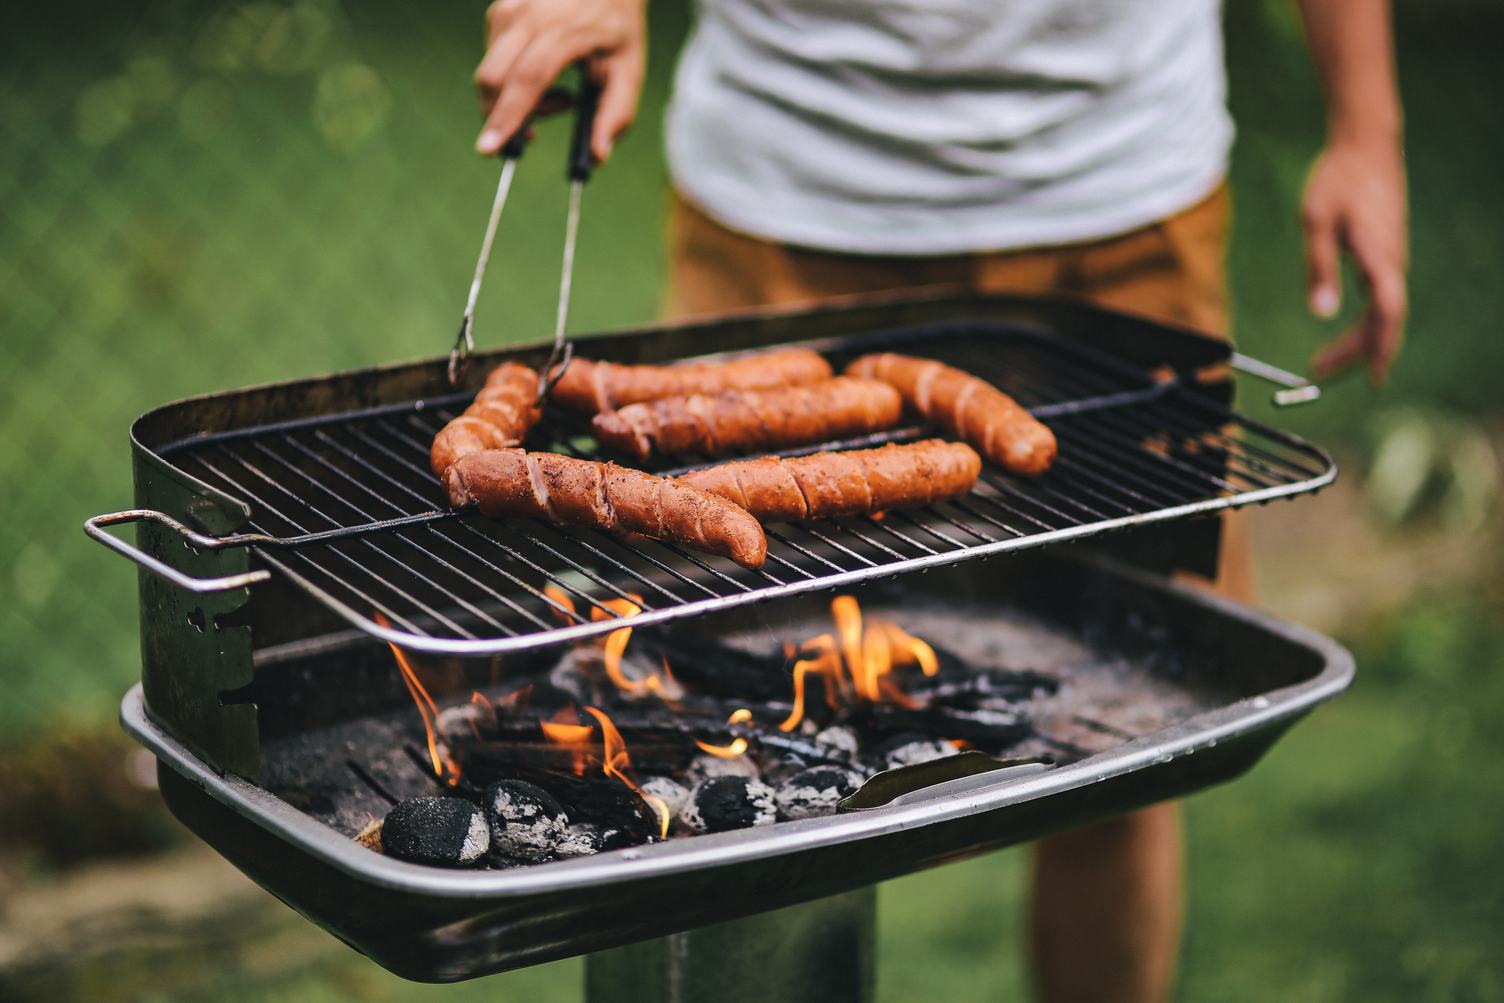 Man Grilling Sausages Outdoors